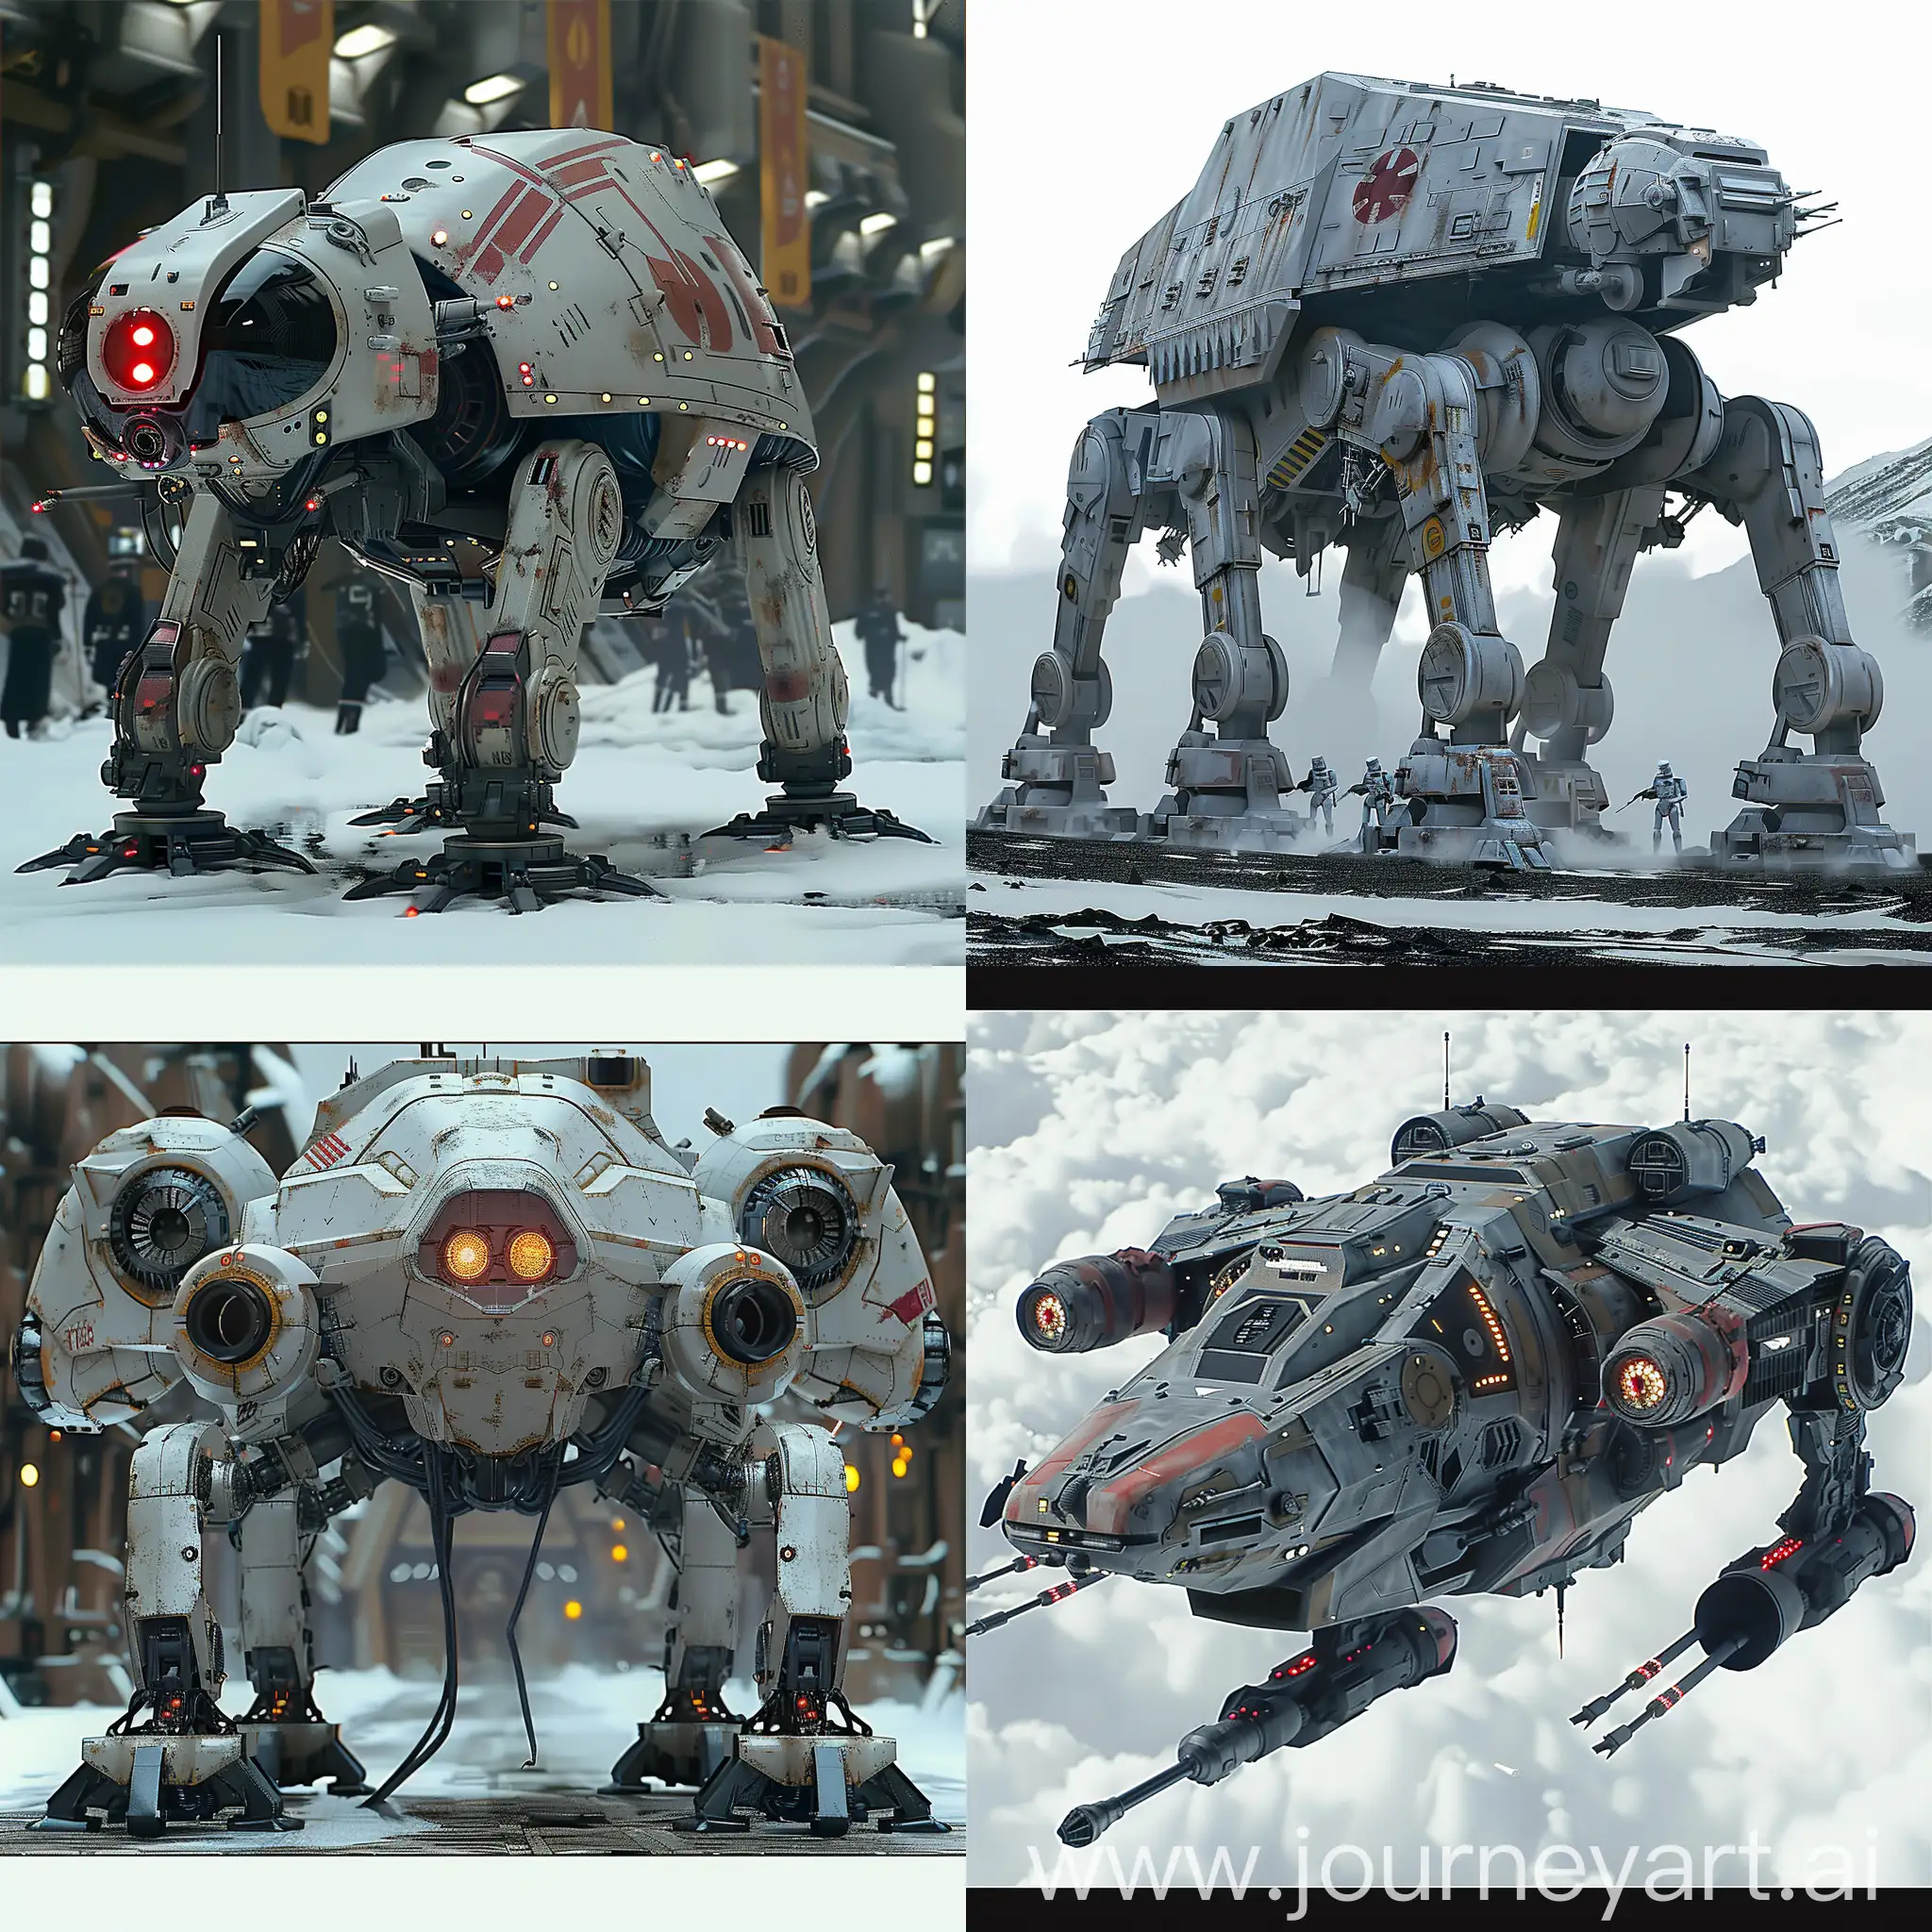 Futuristic-Star-Wars-All-Terrain-Tactical-Enforcer-with-Advanced-AI-Navigation-System-and-Energy-Shielding